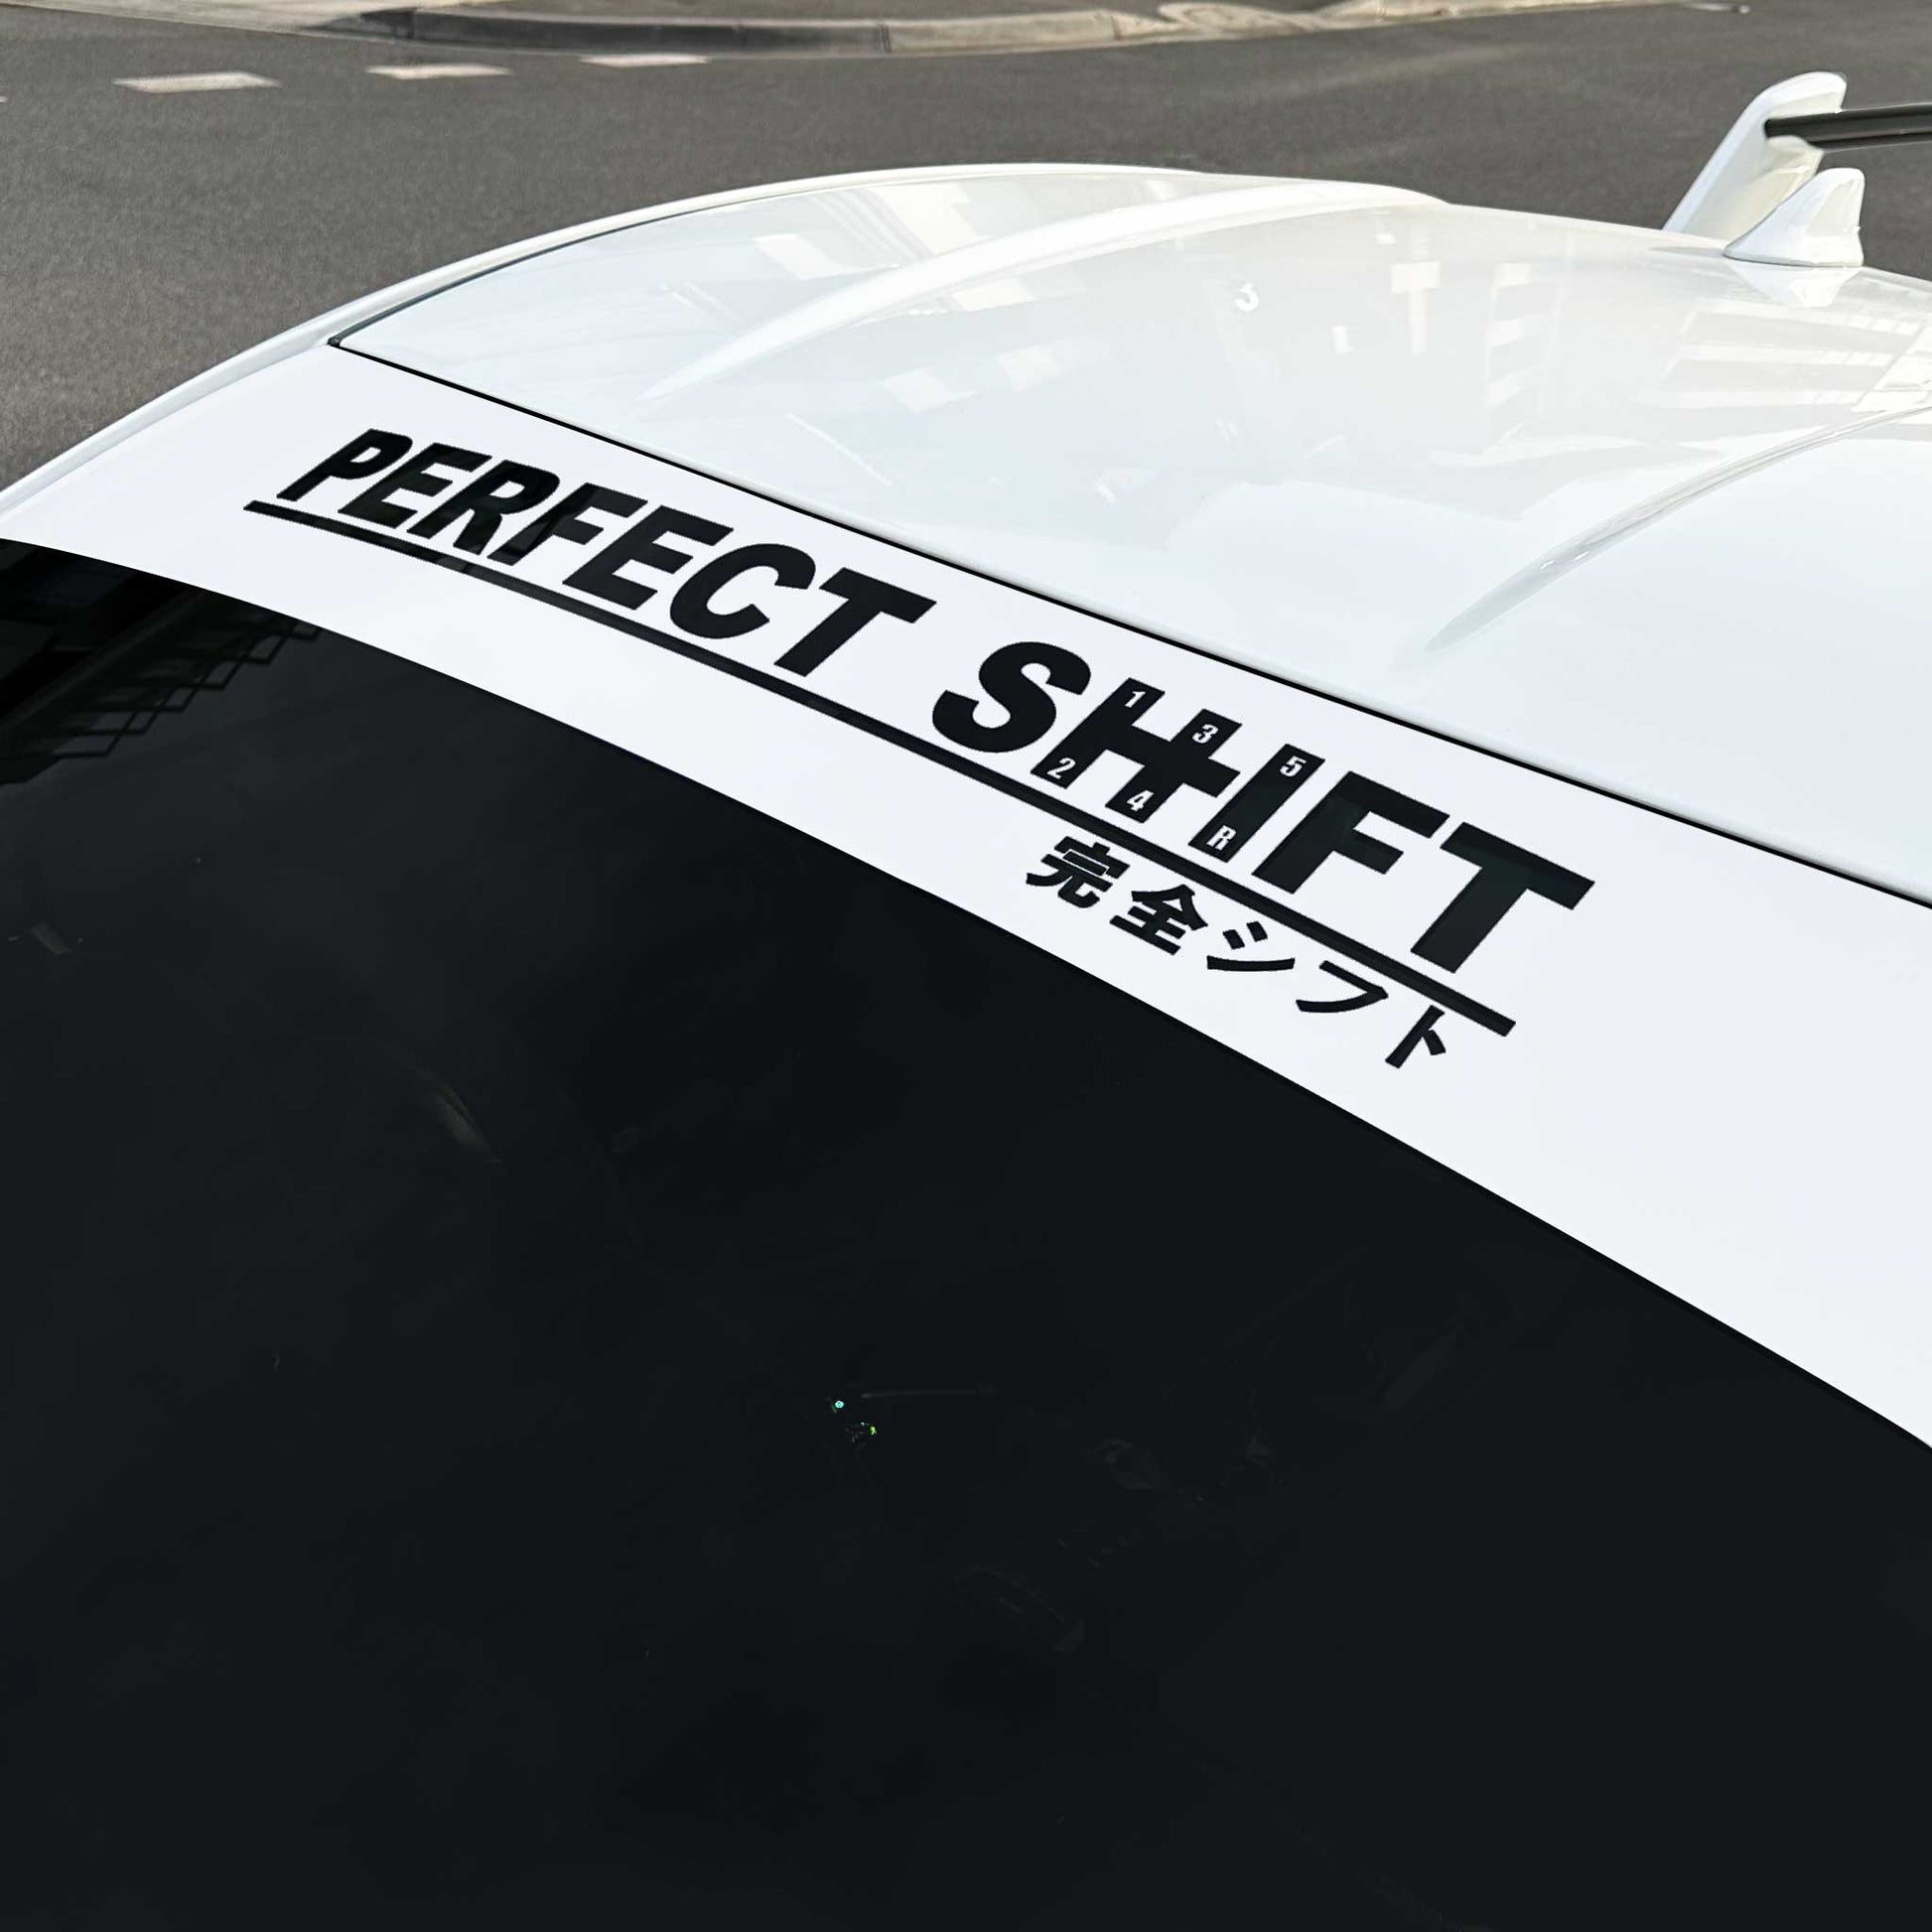 A branded Perfect Shift windshield banner with white background applied on a Toyota 86 that is parked on street